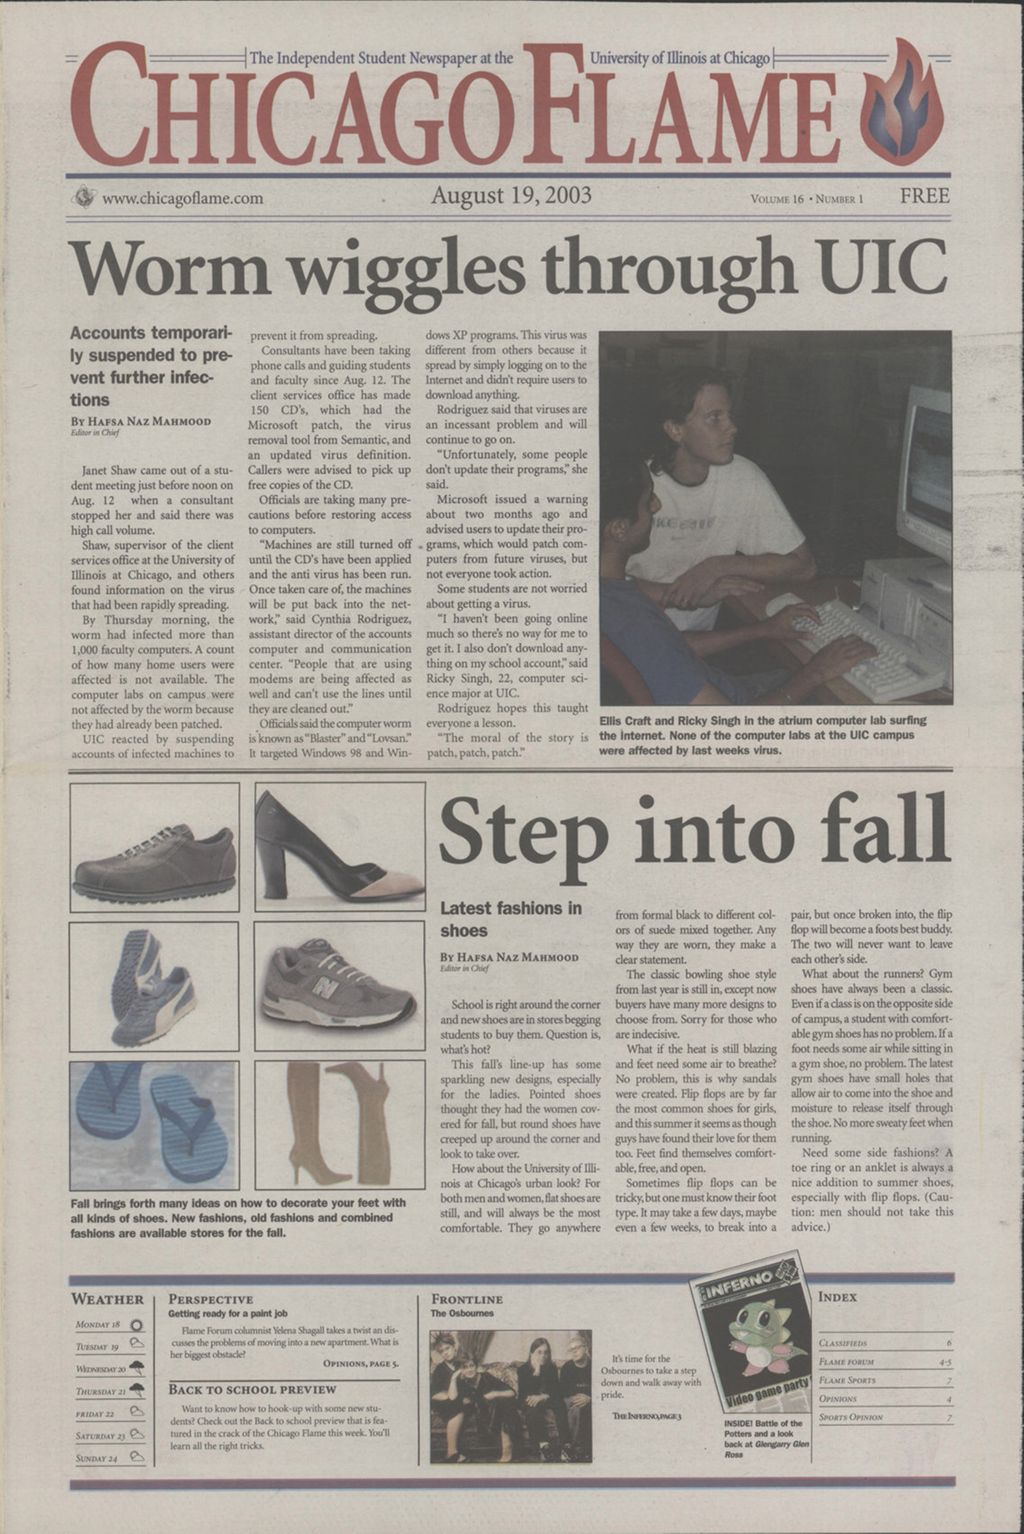 Chicago Flame (August 19, 2003)